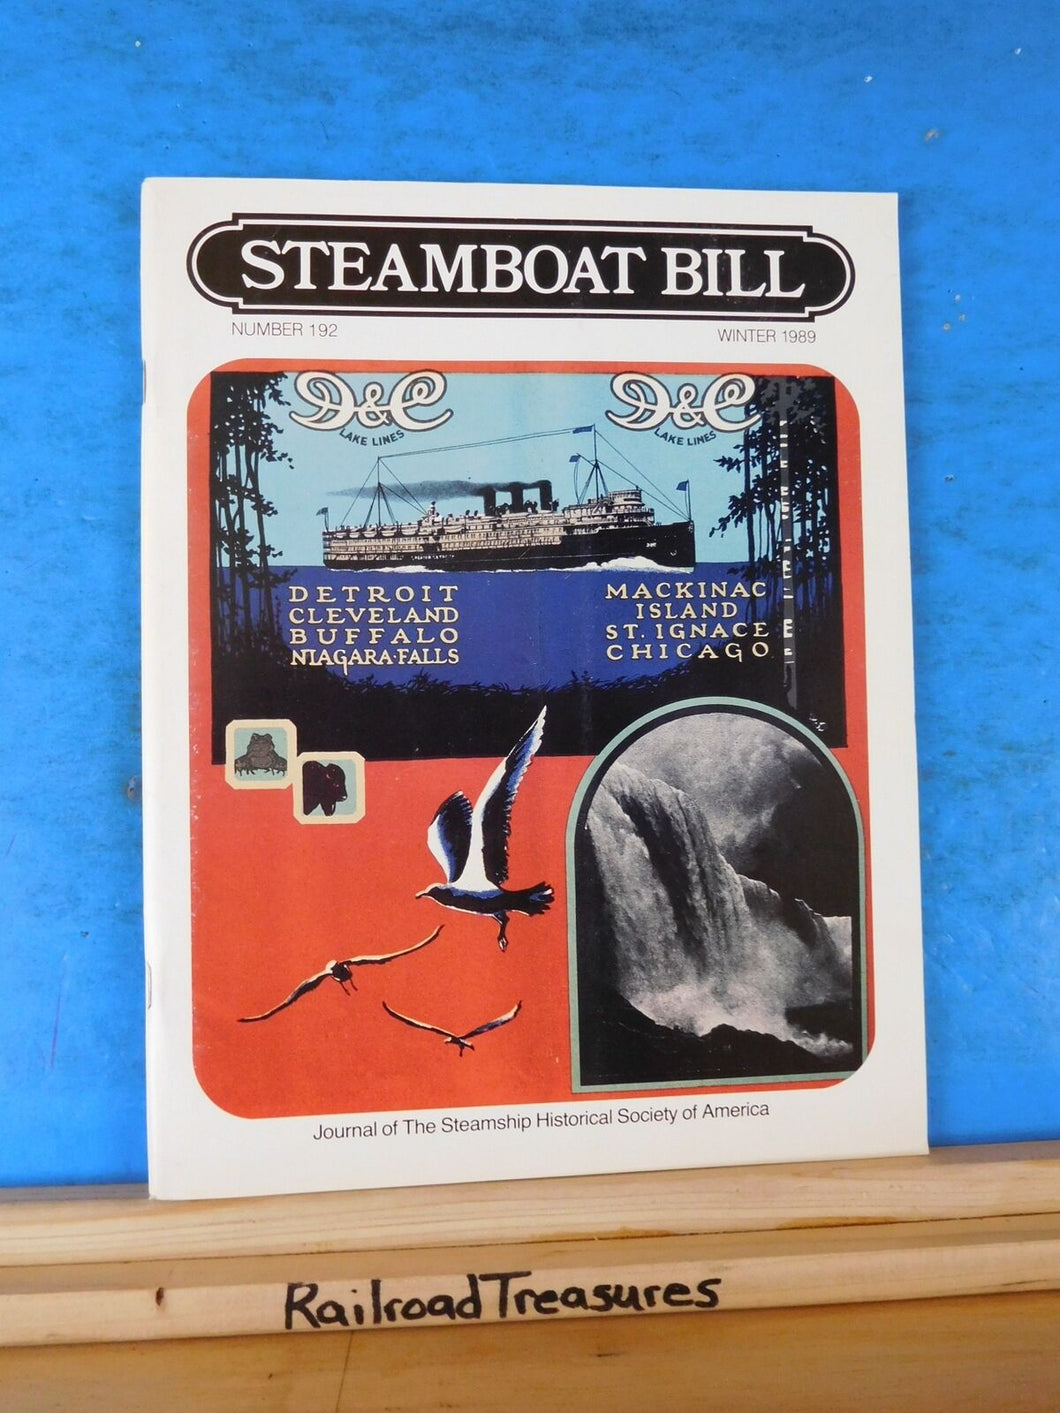 Steamboat Bill #192 Winter 1989 Journal of the Steamship Historical Society